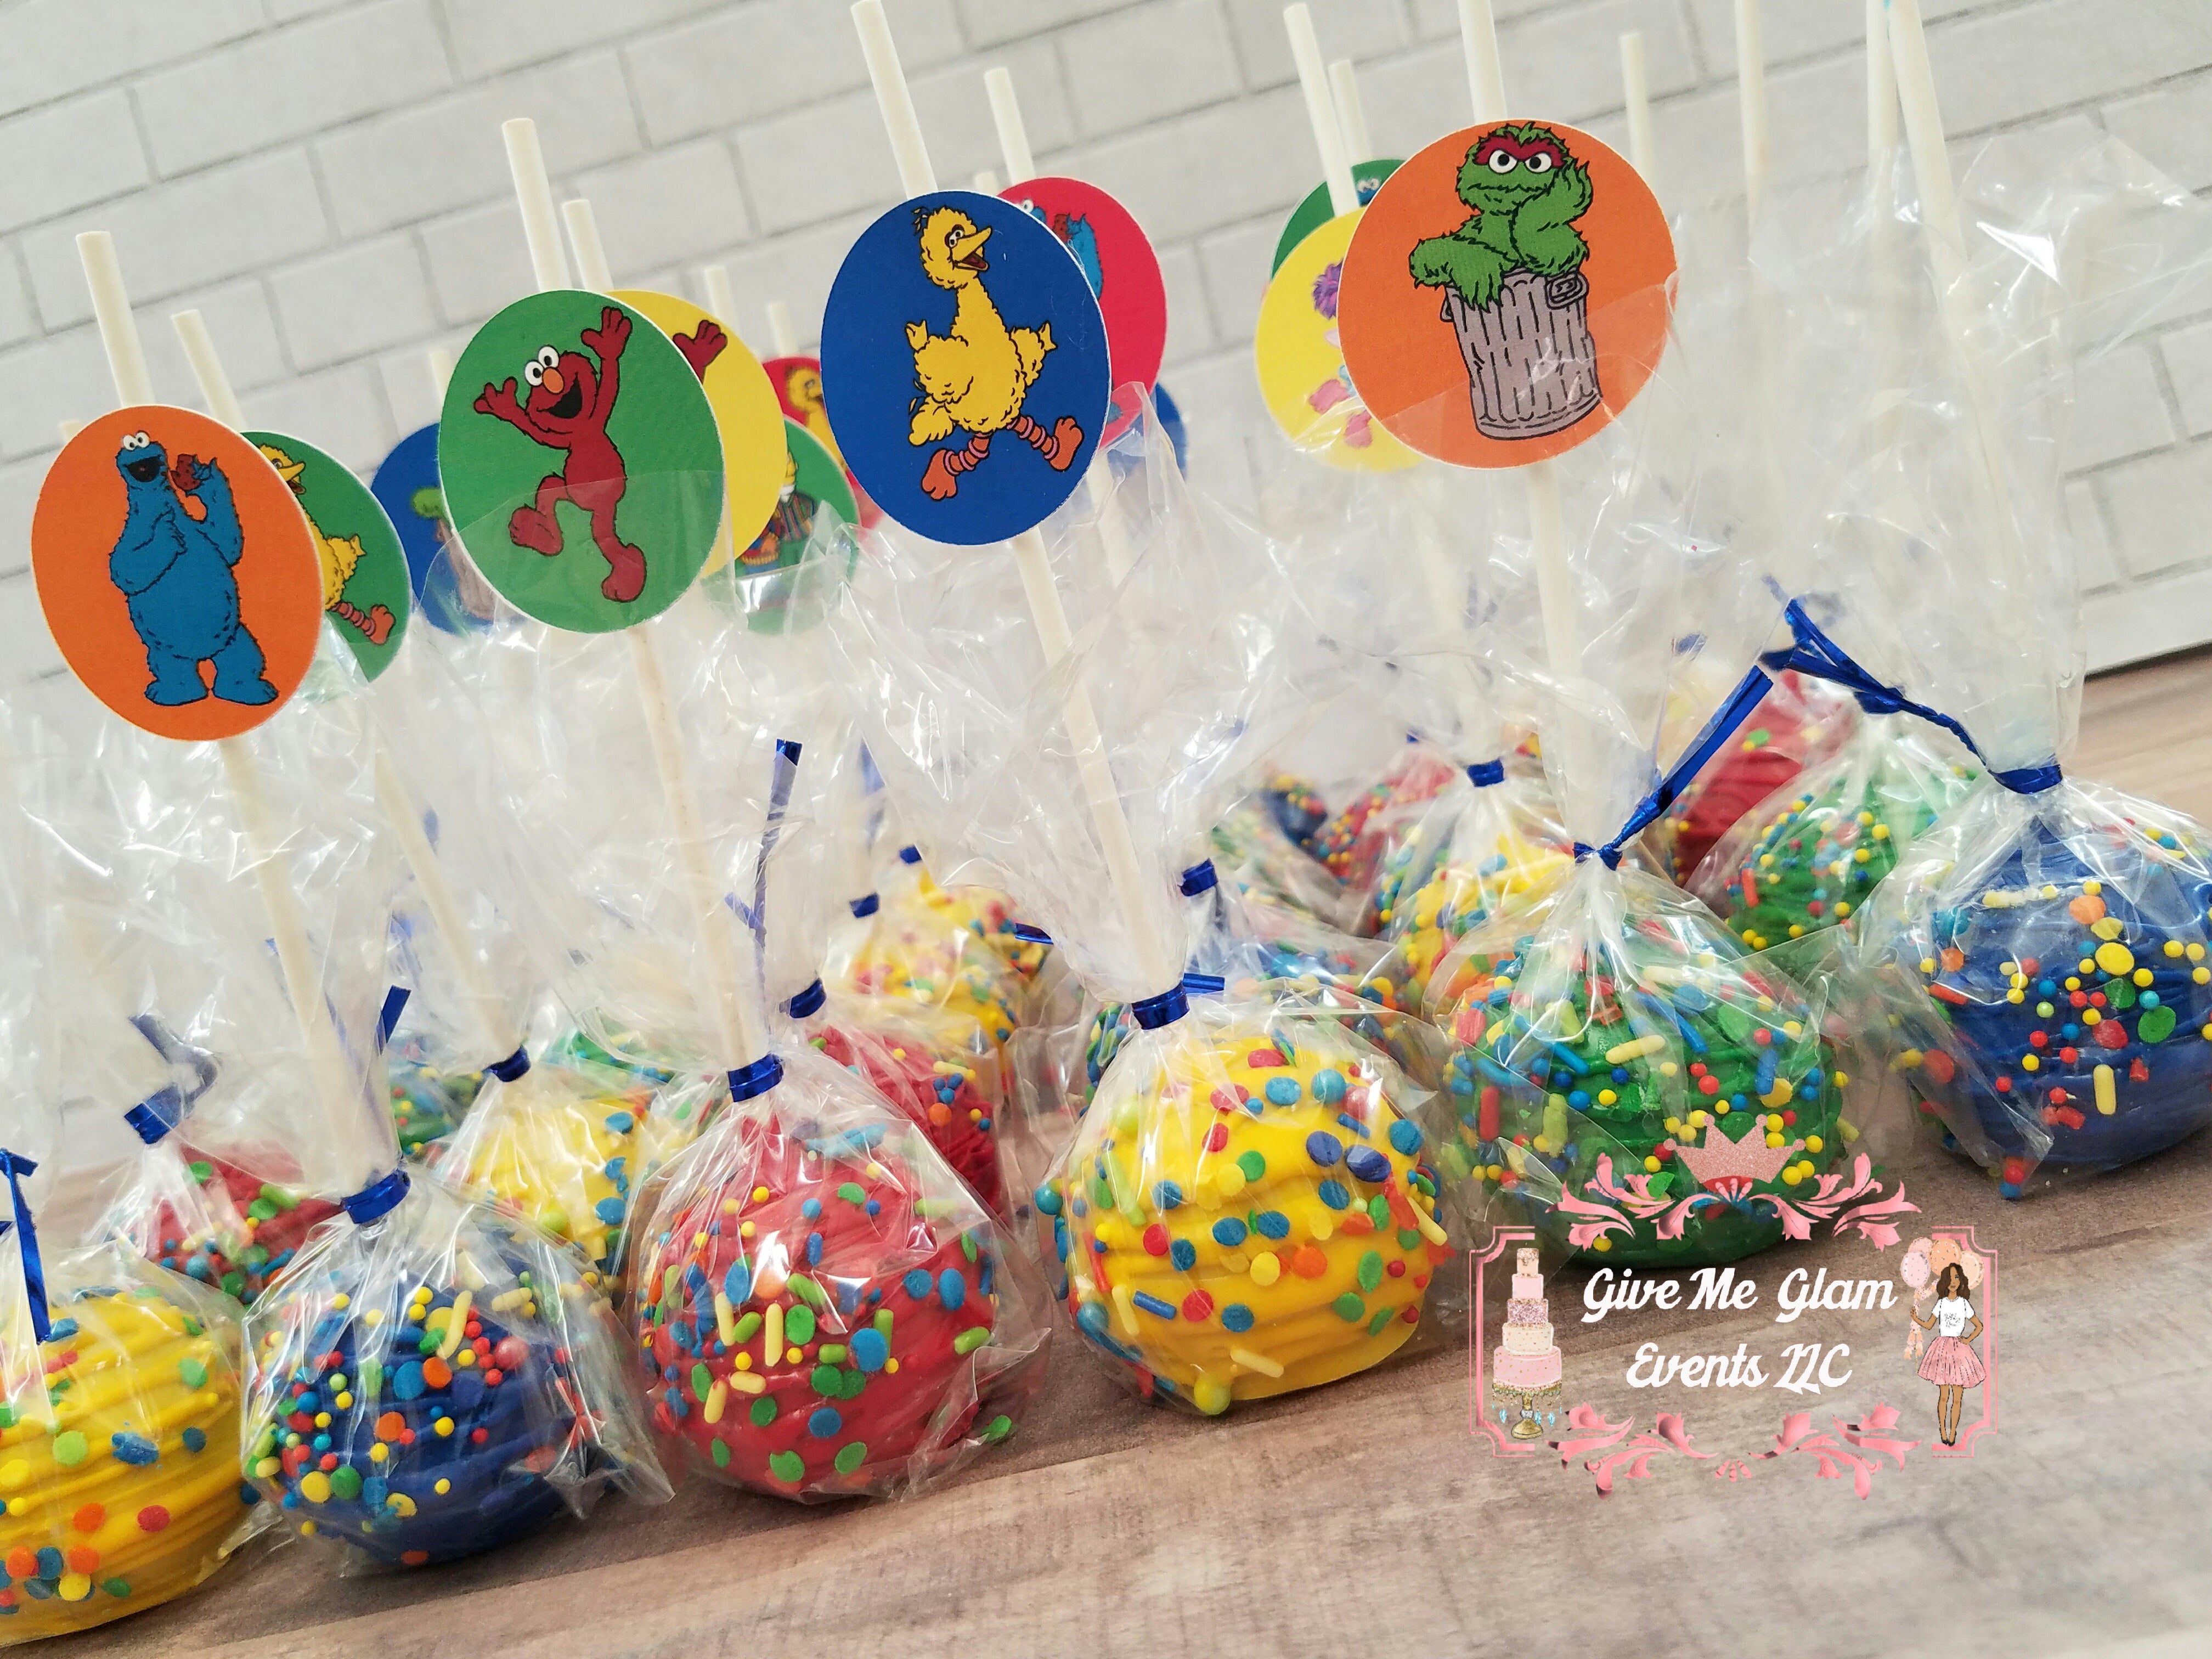 Custom Cake Pops with Stick Toppers 1 Dozen  (12ct)